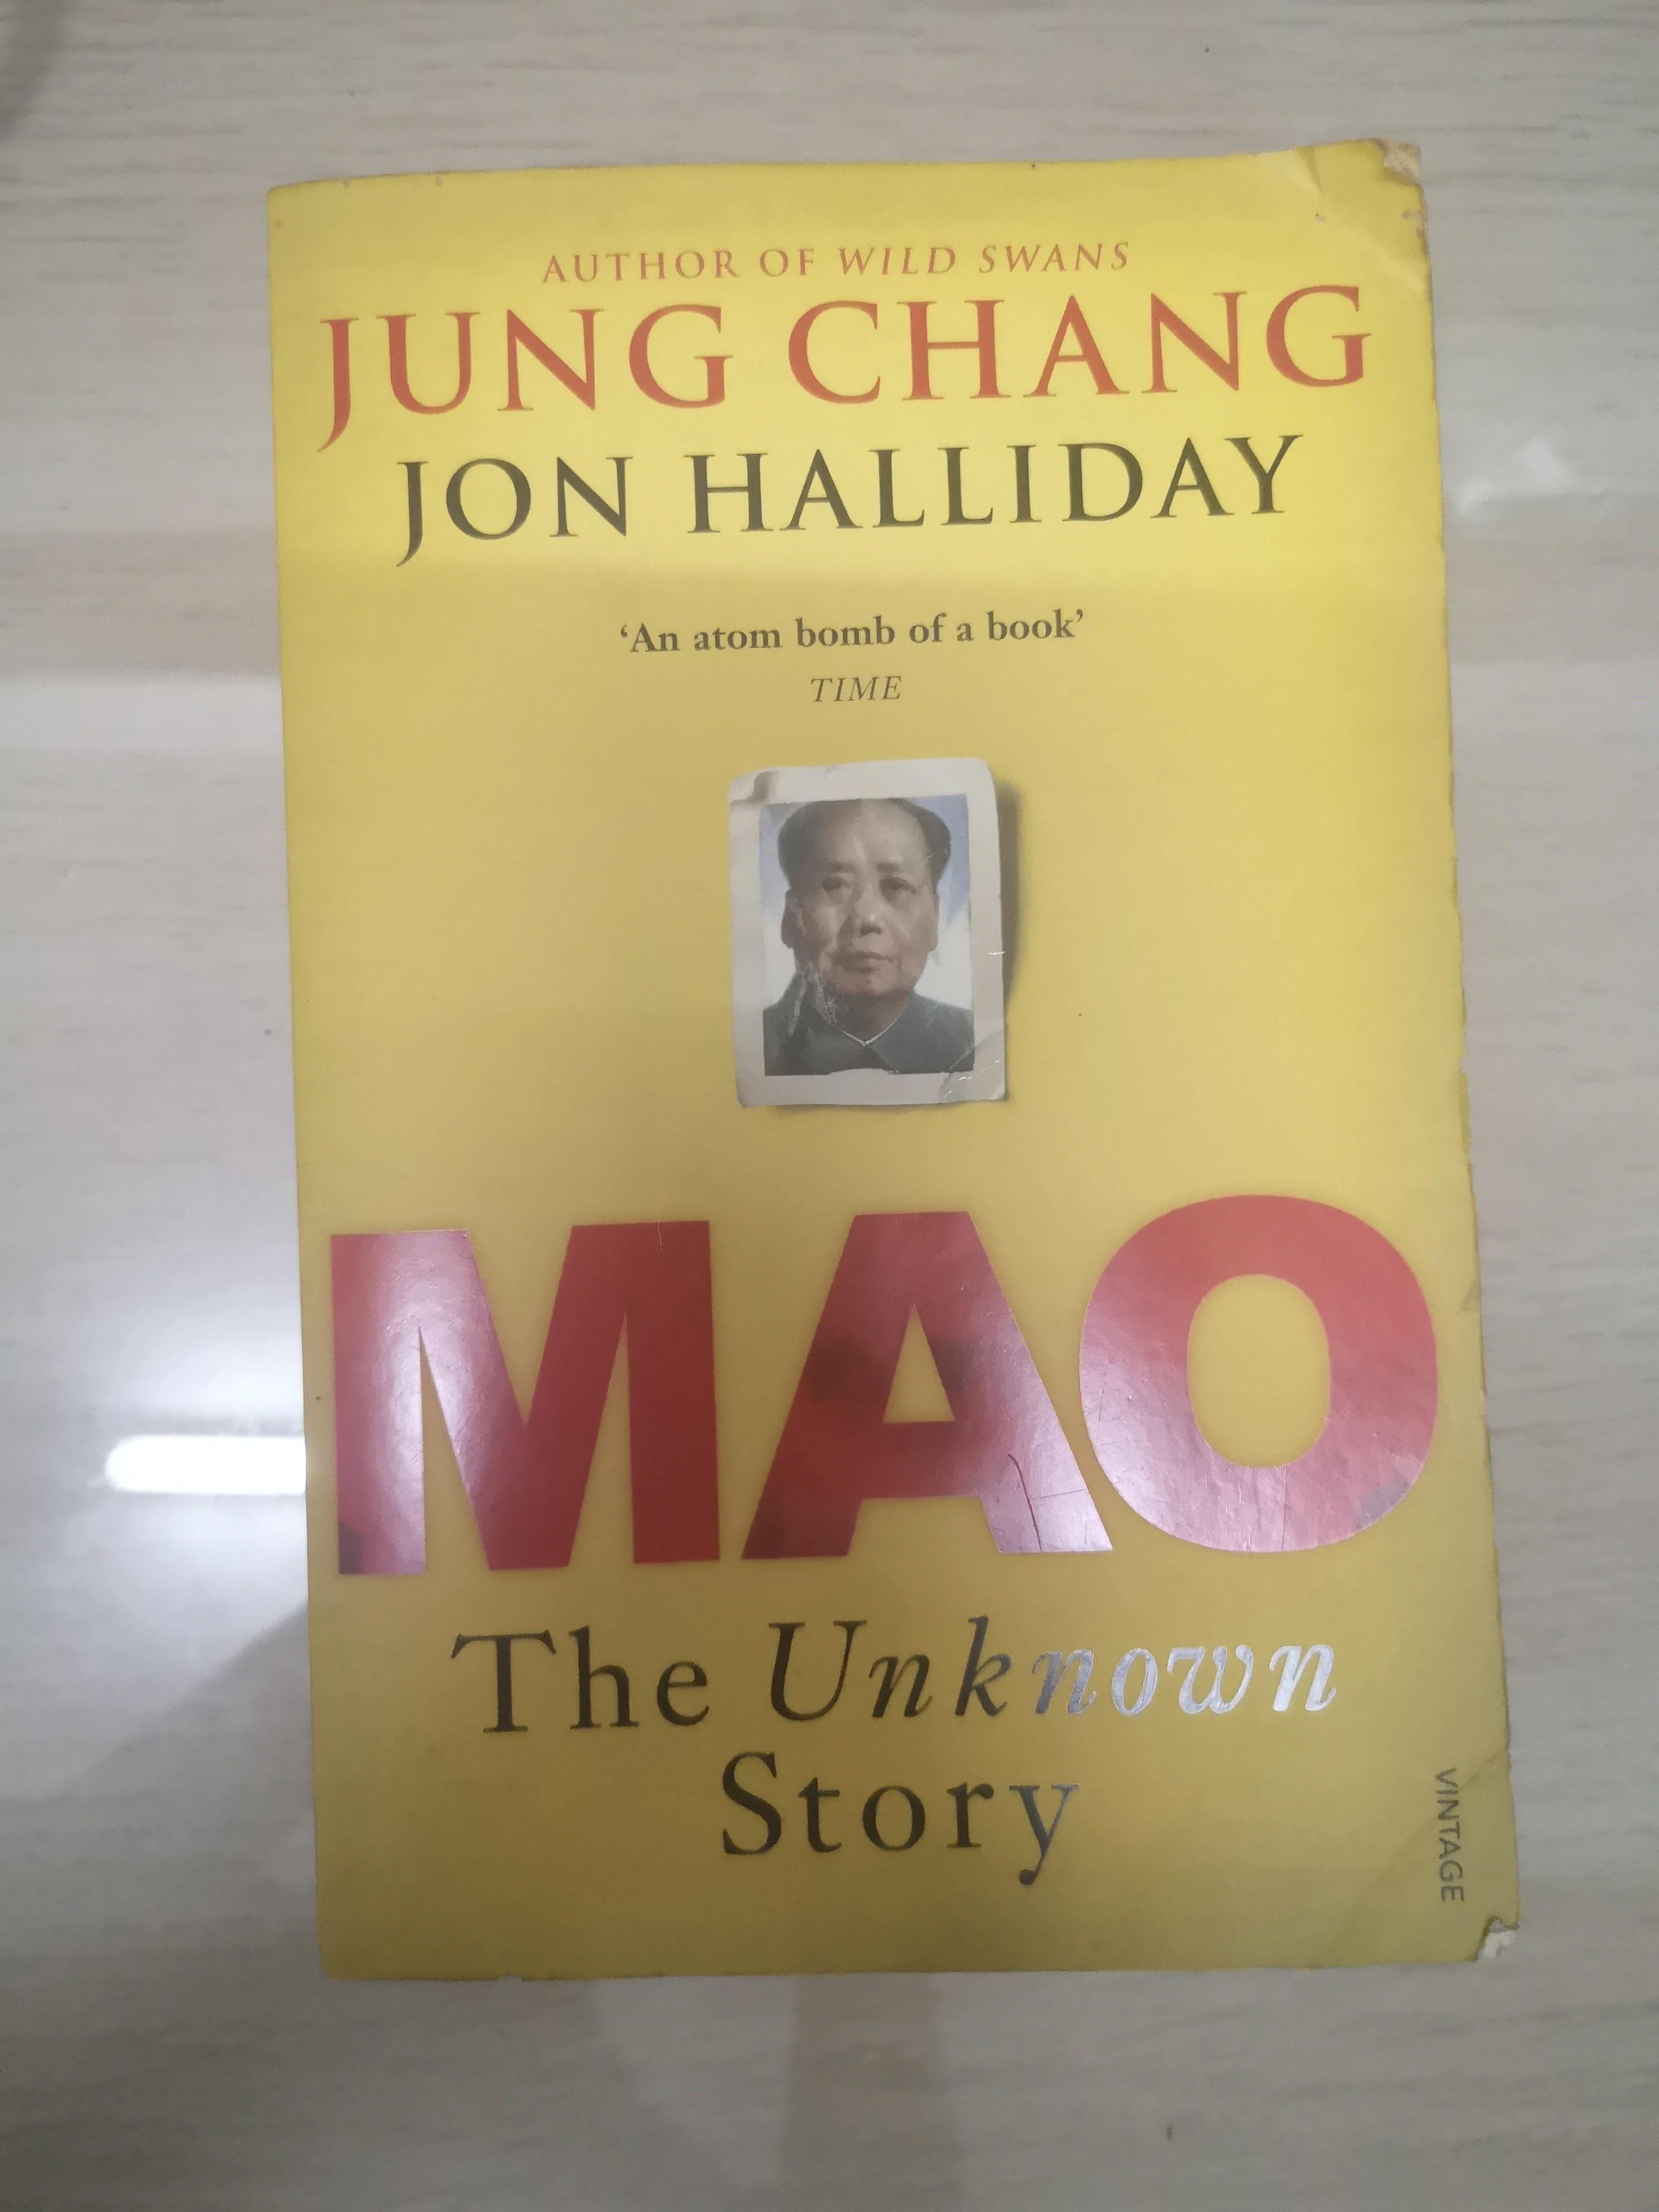 Halliday,　Magazines,　on　Toys,　and　by　Mao　Storybooks　Chang　Jon　Jung　Books　Hobbies　the　Story　Unknown　Carousell